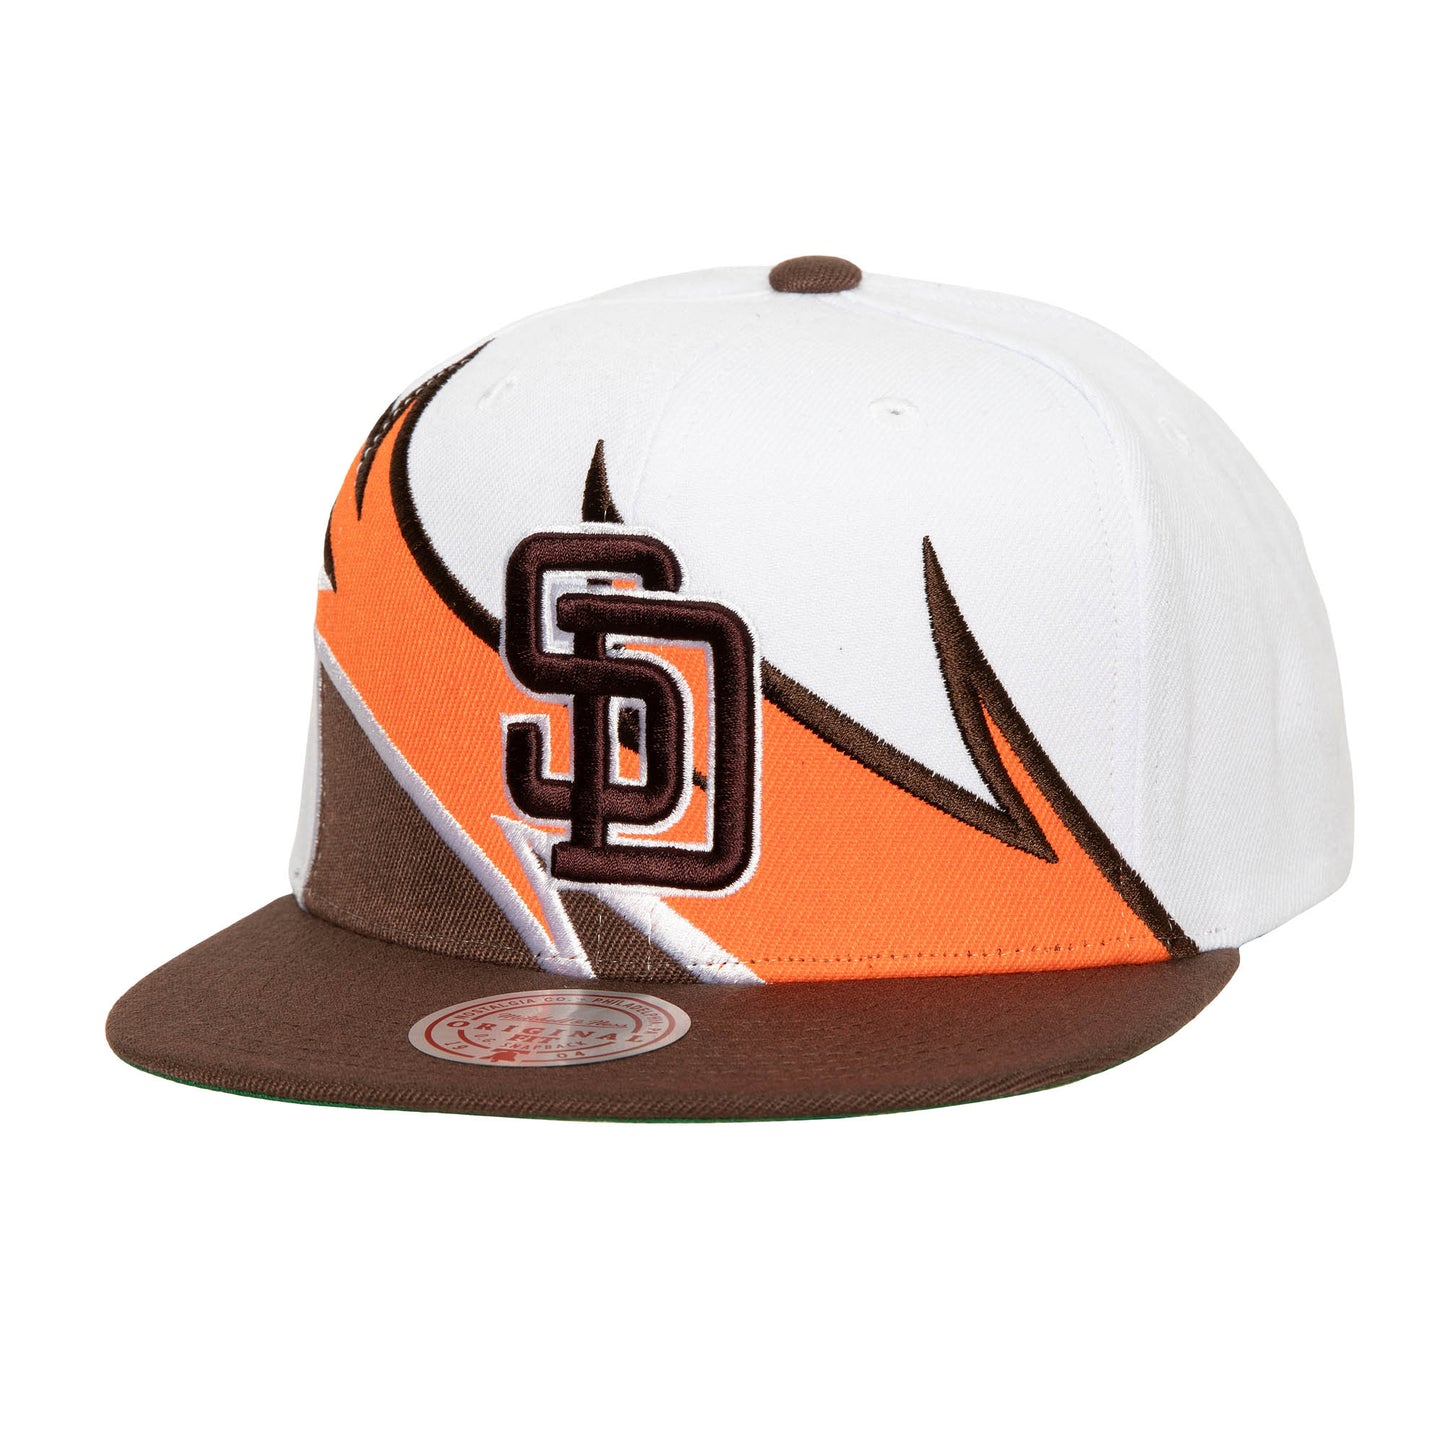 San Diego Padres Mitchell & Ness Wave Runner Snapback Hat